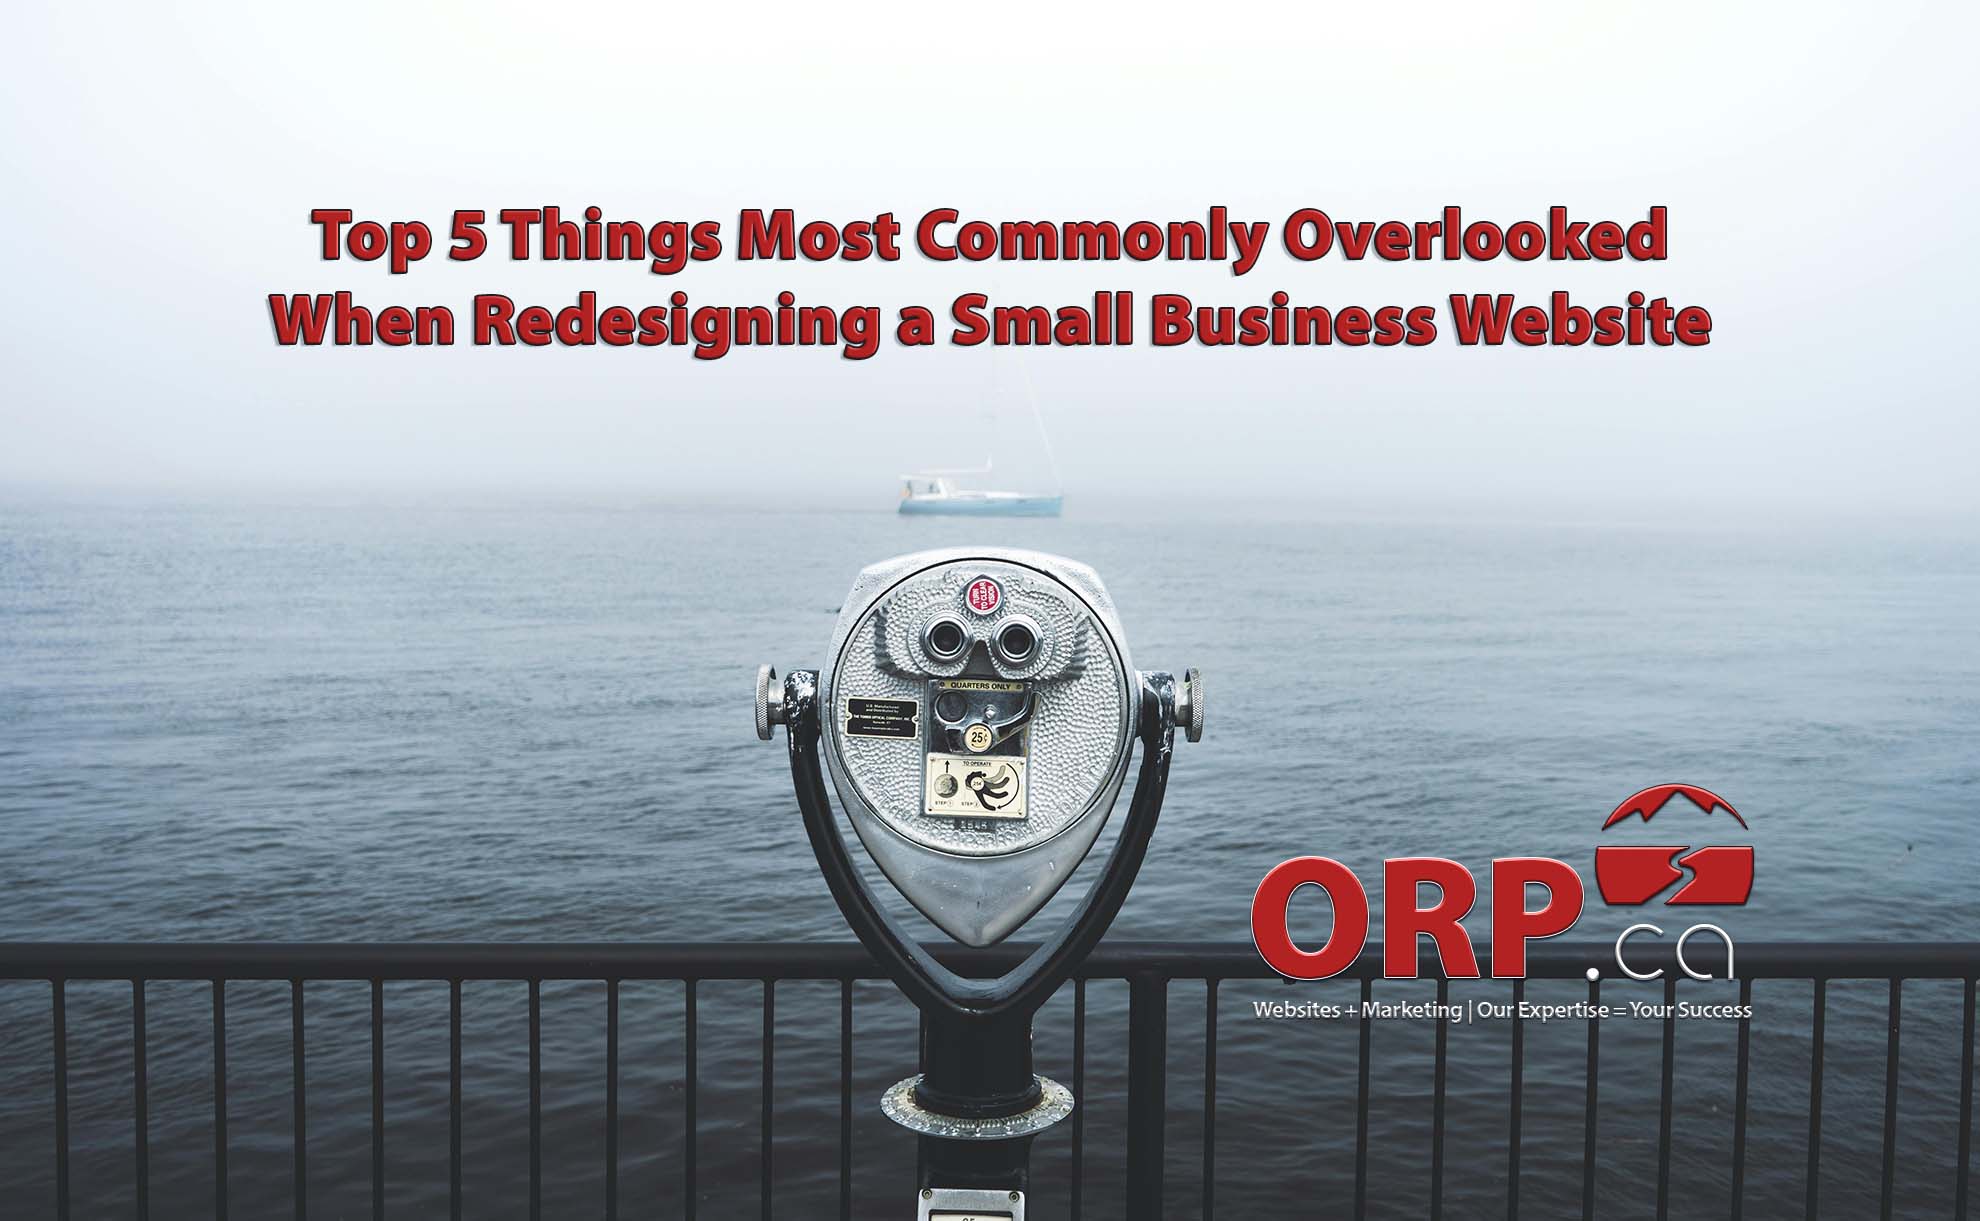 Top 5 Things Most Commonly Overlooked When Redesigning a Small Business Website a small business website redesign article by ORP.ca, Your Small Business Website and Digital Marketing Services Provider